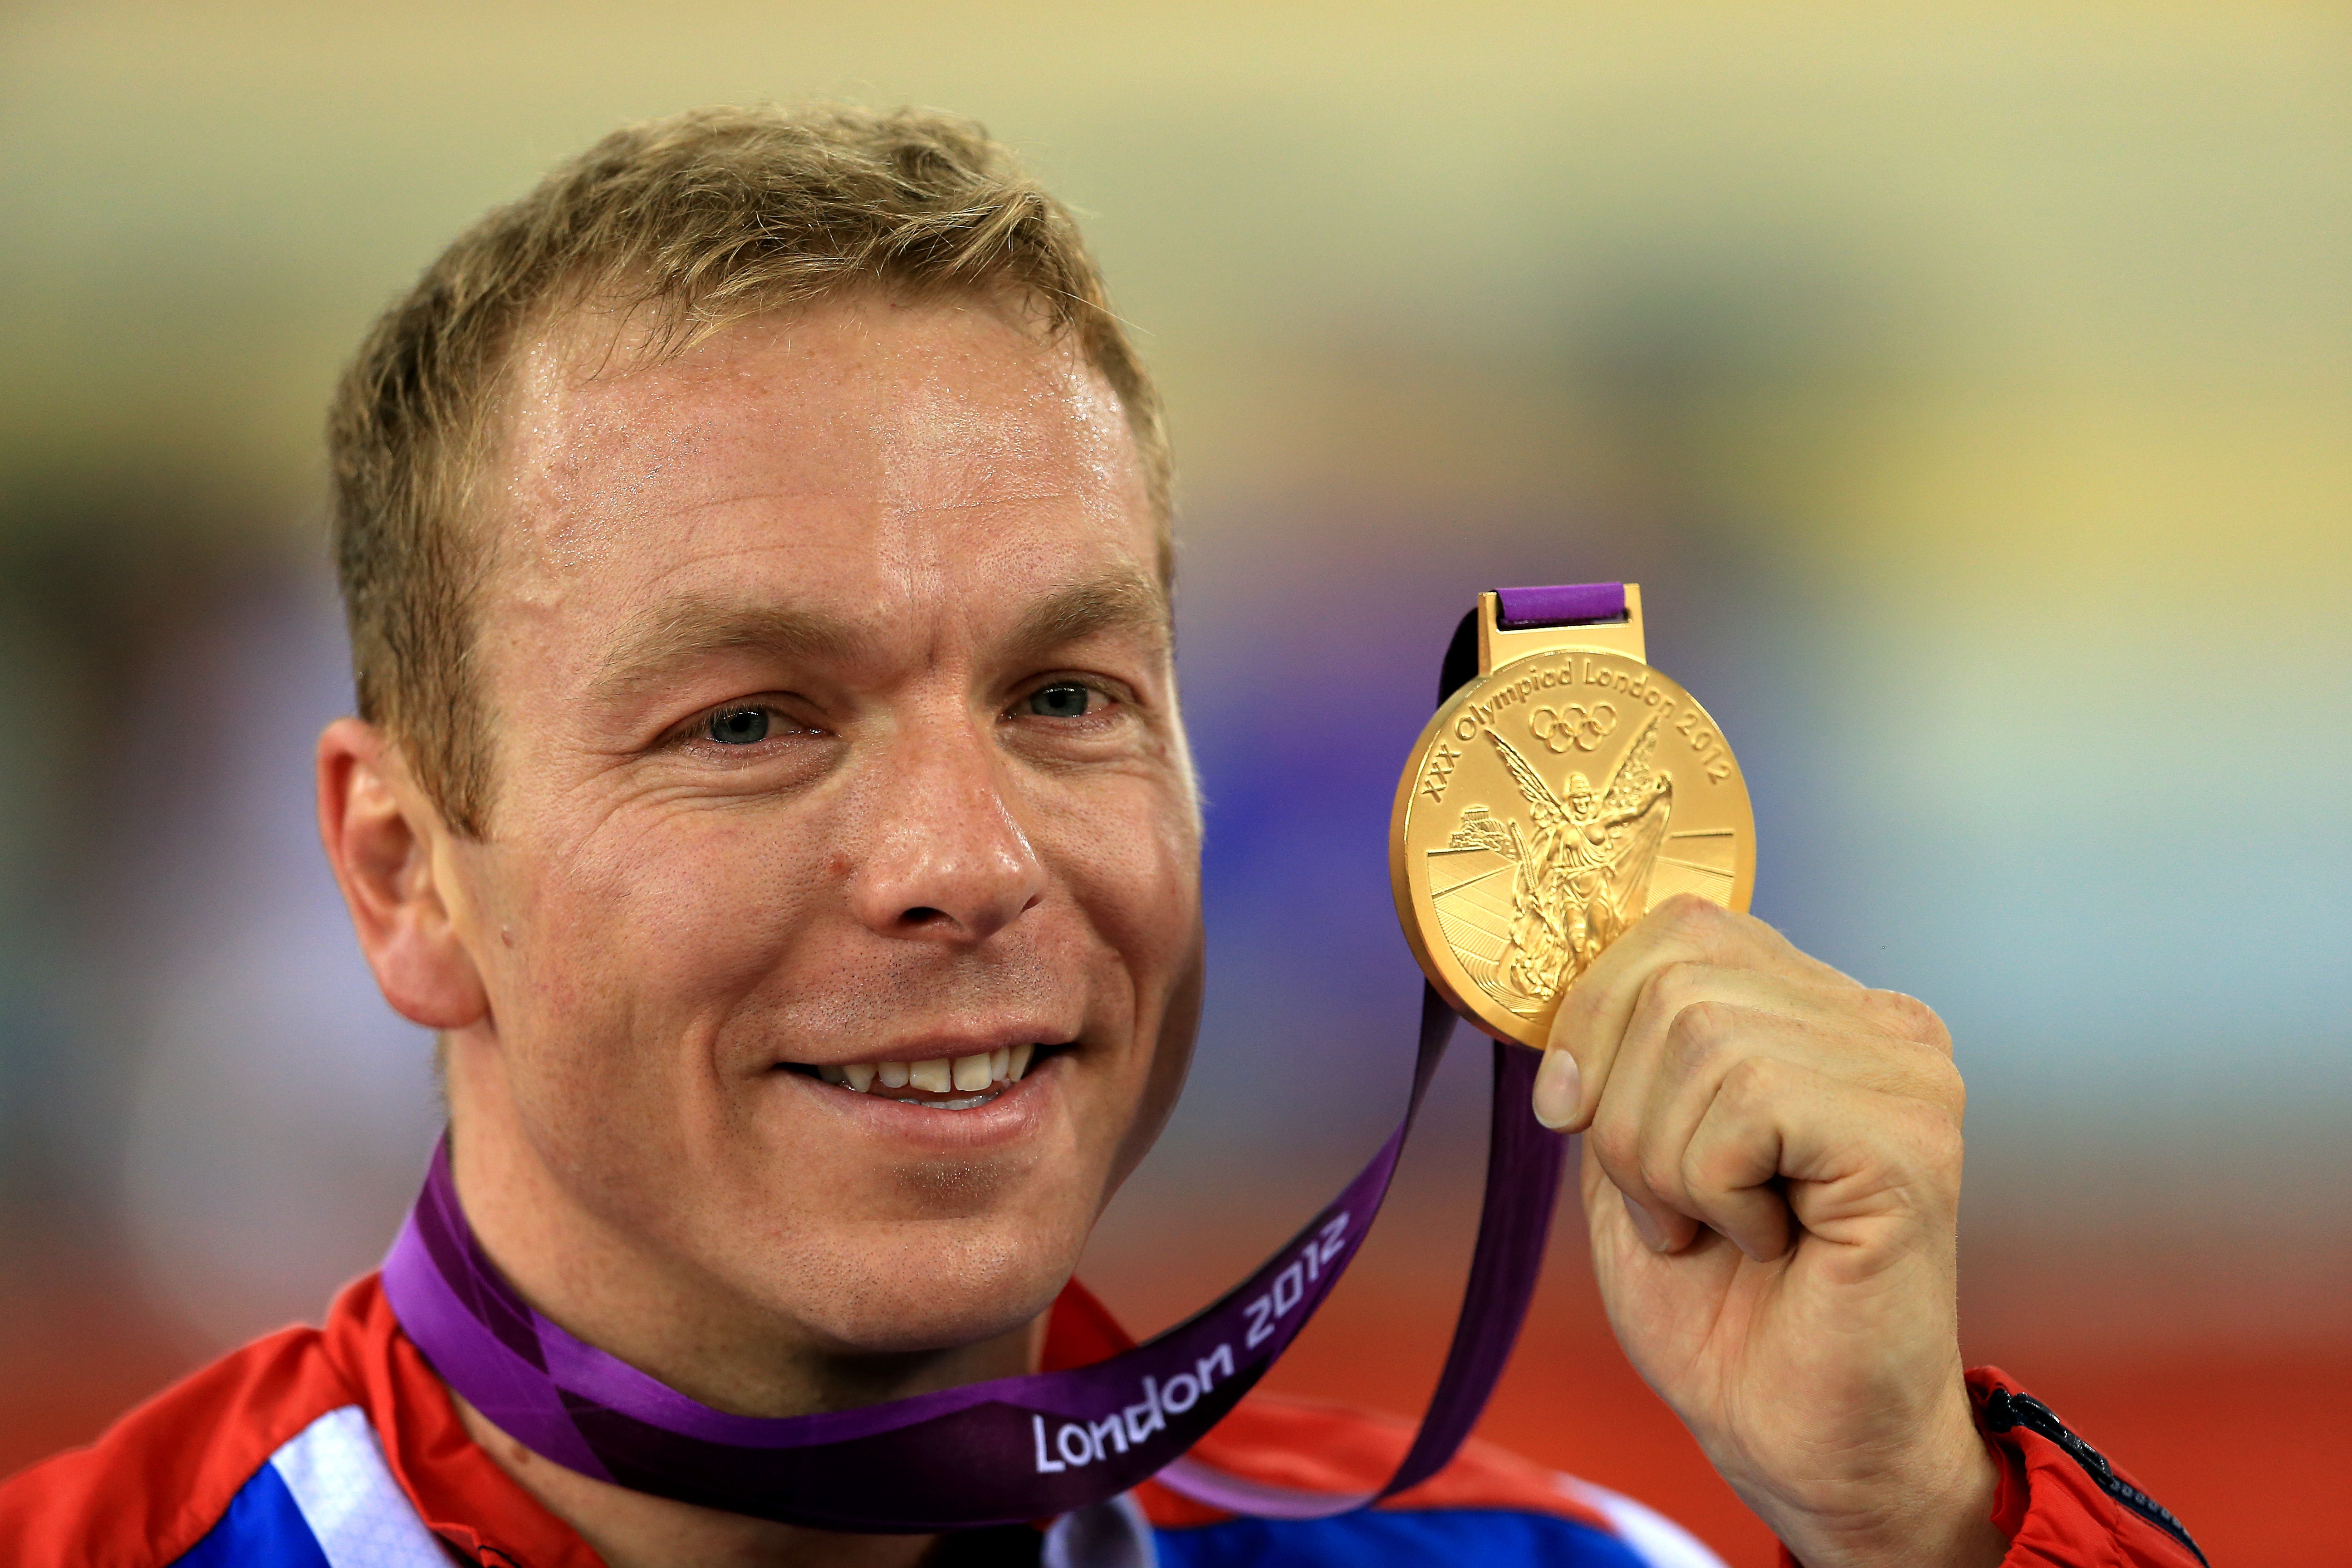 Sir Chris Hoy won his sixth Olympic gold medal in the men’s keirin at London 2012 (Stephen Pond/PA)